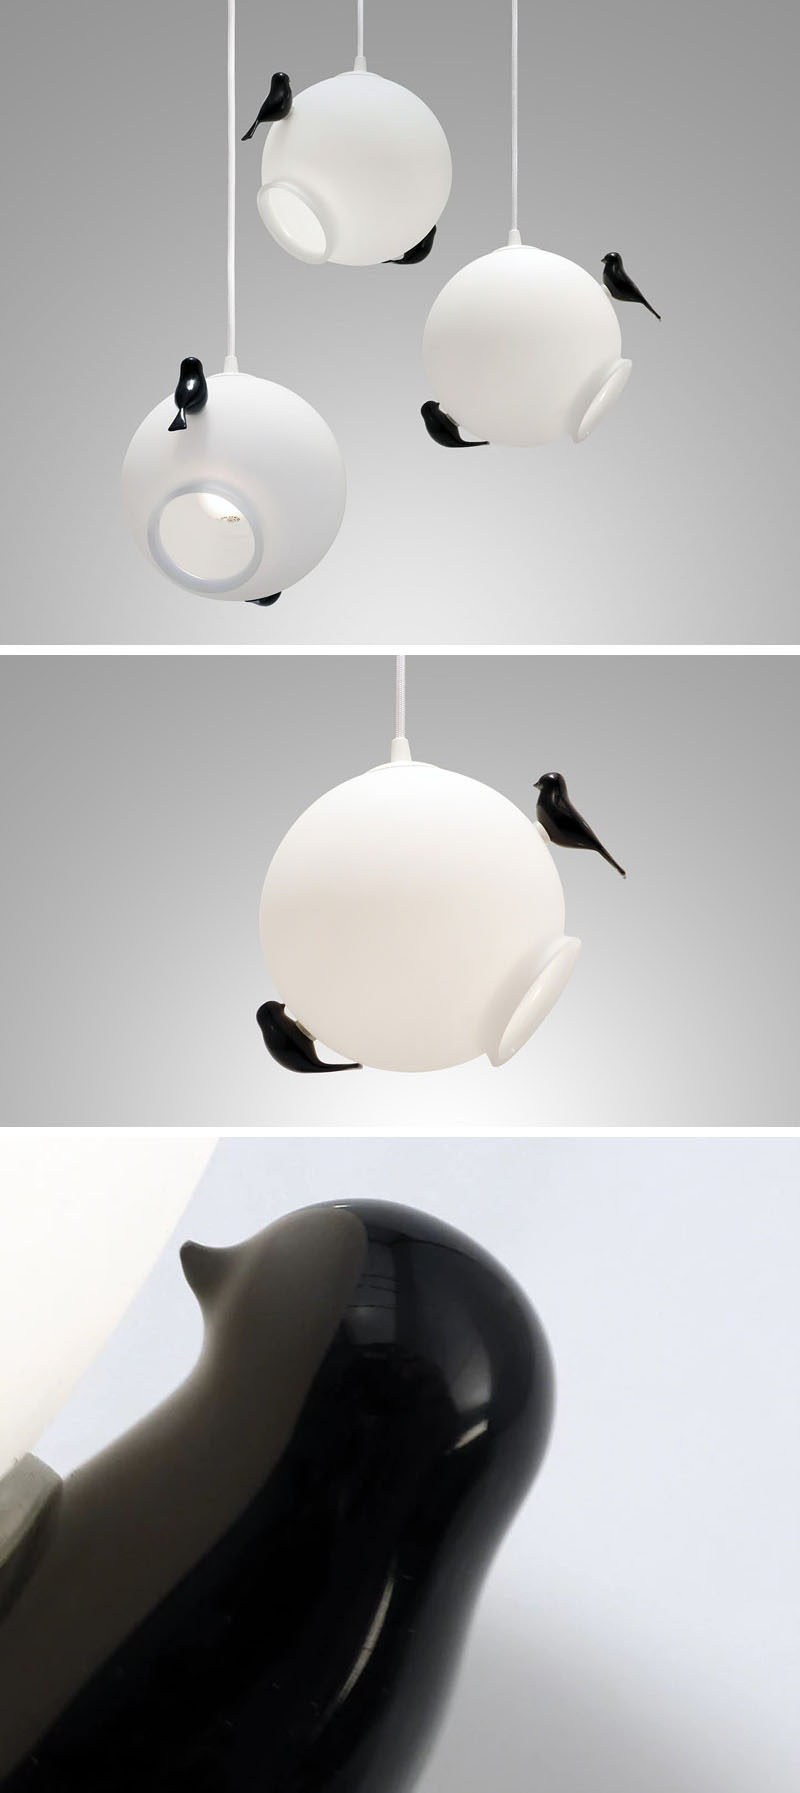 Designer Ricardo Santo has created the Ninho de Andorinhas, a modern pendant lamp that's hand-blown glass in opal white with a matte finish and are adorned with black glazed birds